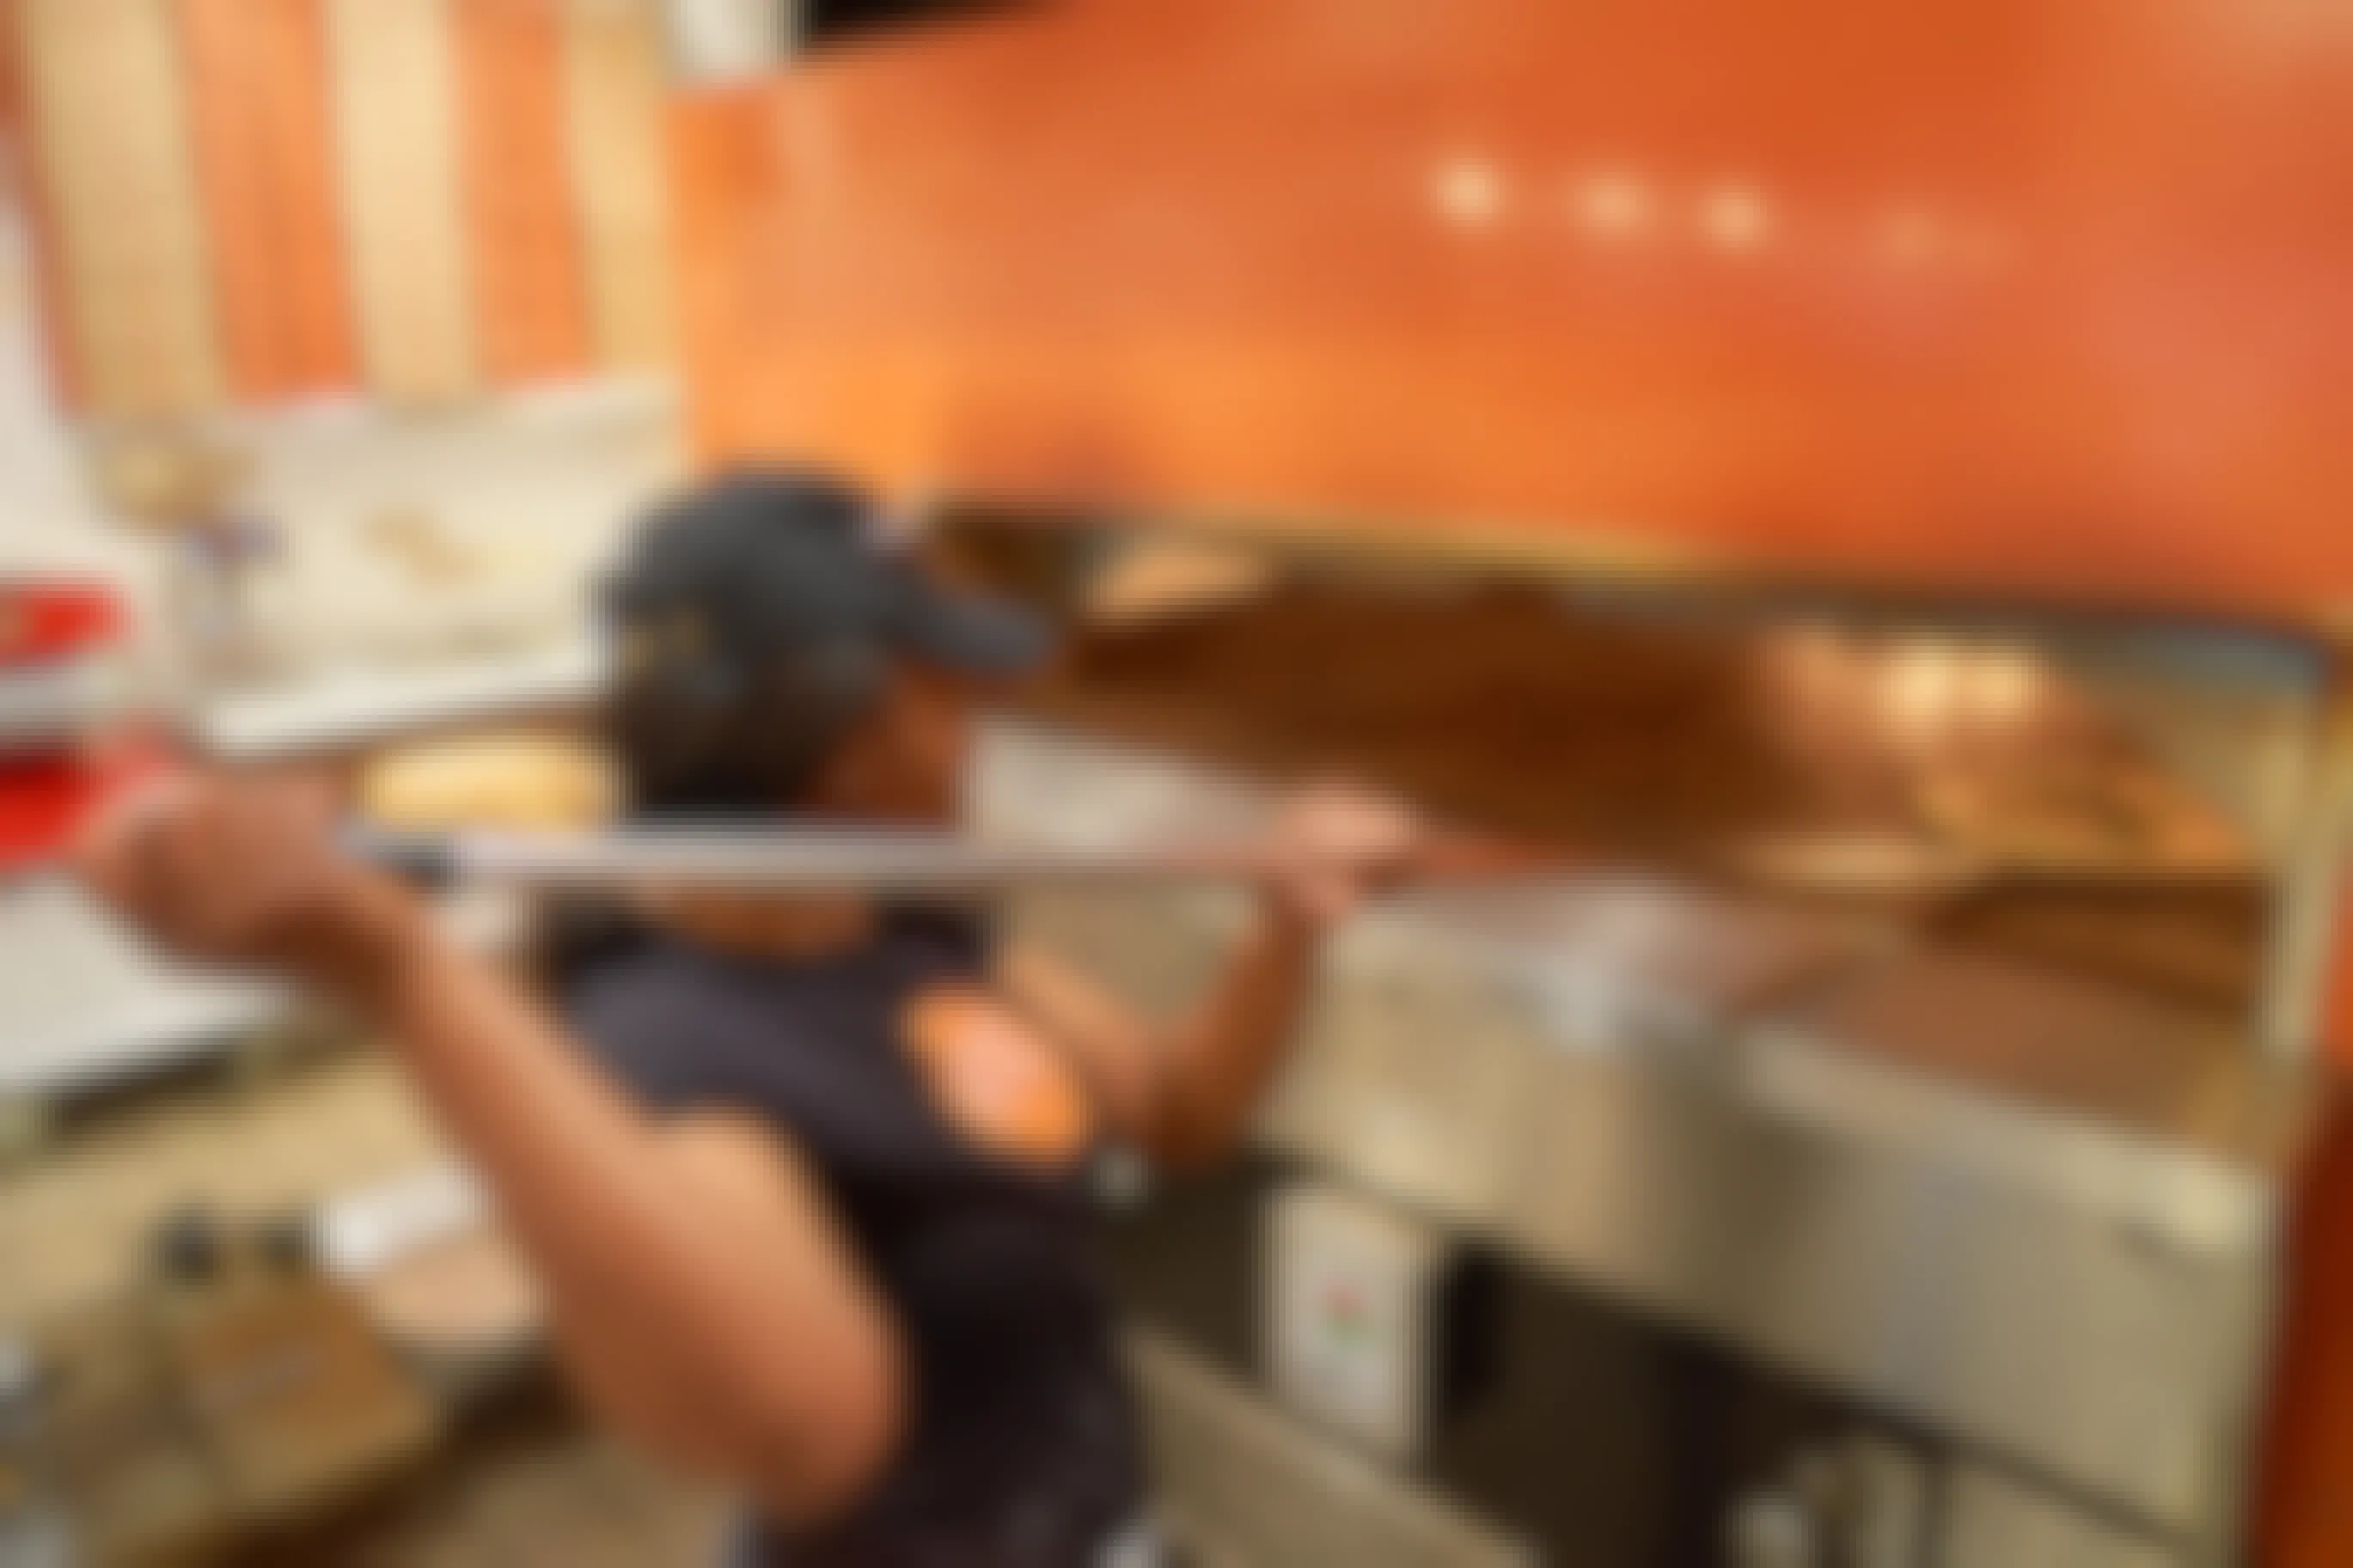 A Blaze Pizza employee pulling a pizza out of their oven with a giant wooden spatula.